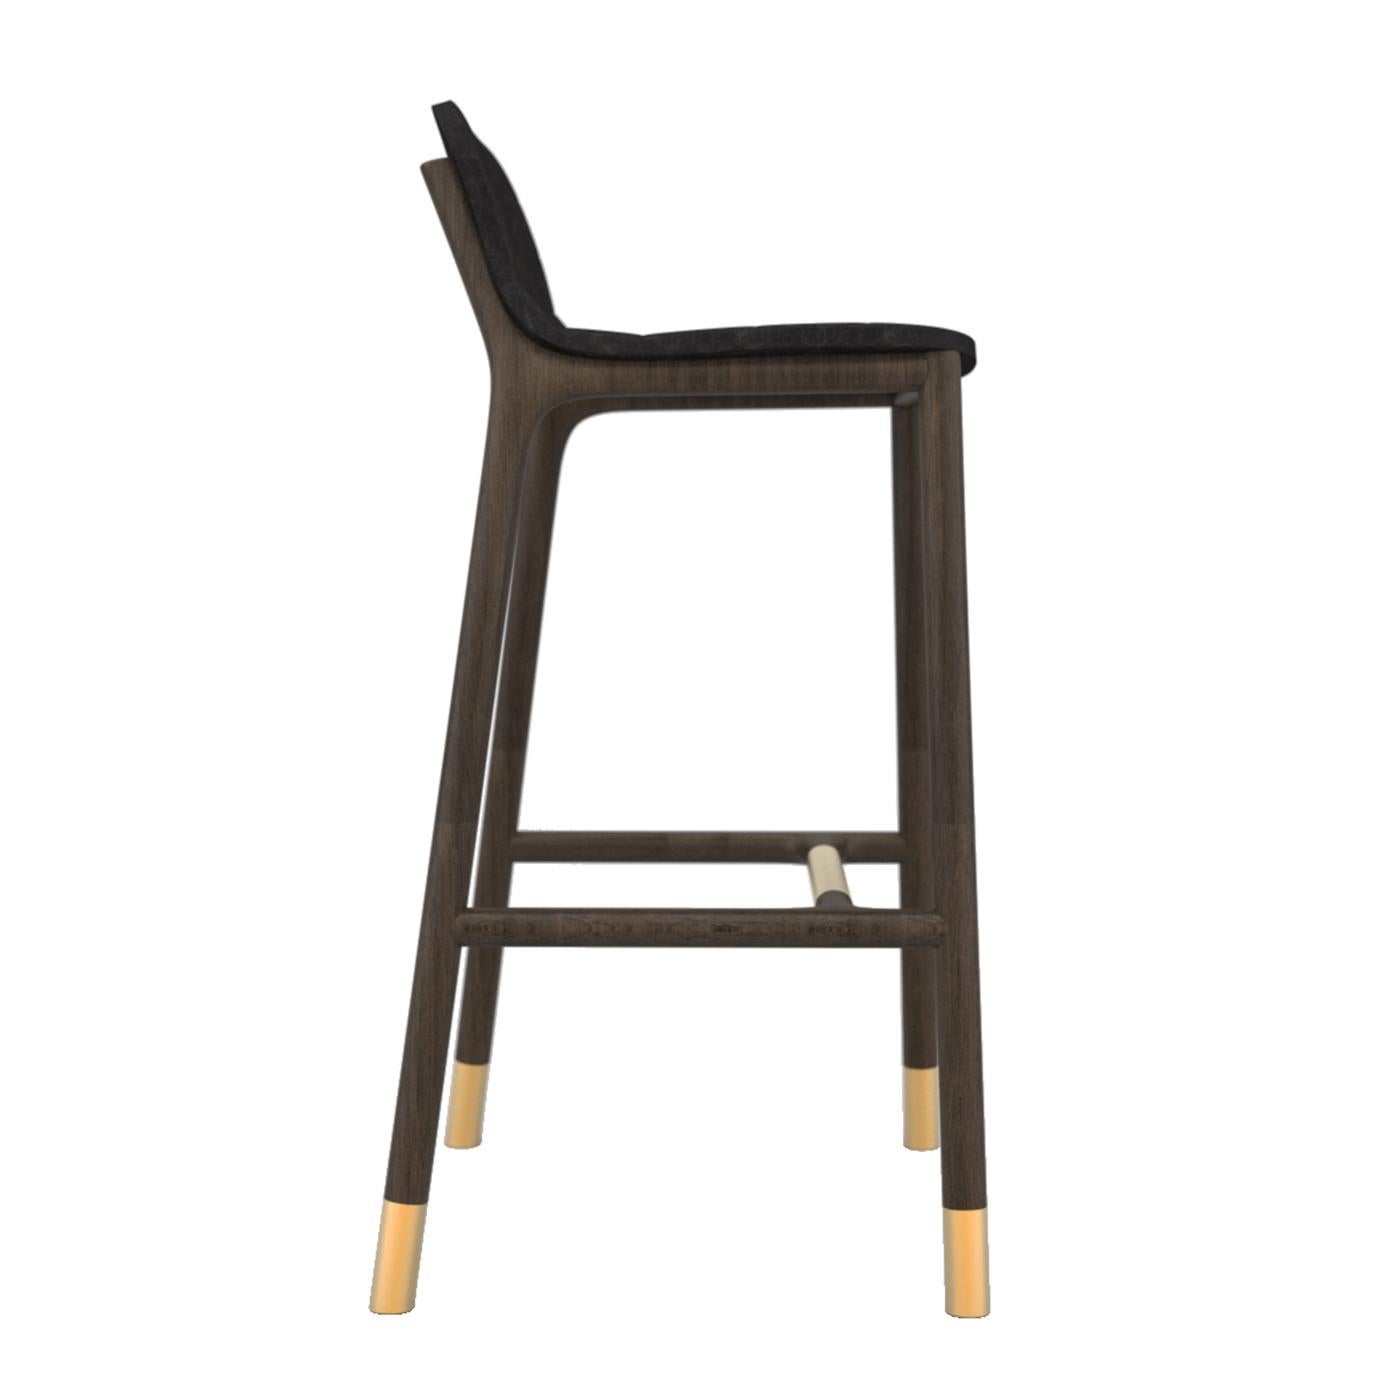 Exuding timeless elegance, this ash bar stool is distinguished by a linear, black-finished silhouette. The rounded seat is padded to provide great comfort, while luminous brass details add a precious accent to the footrest and slender legs. This